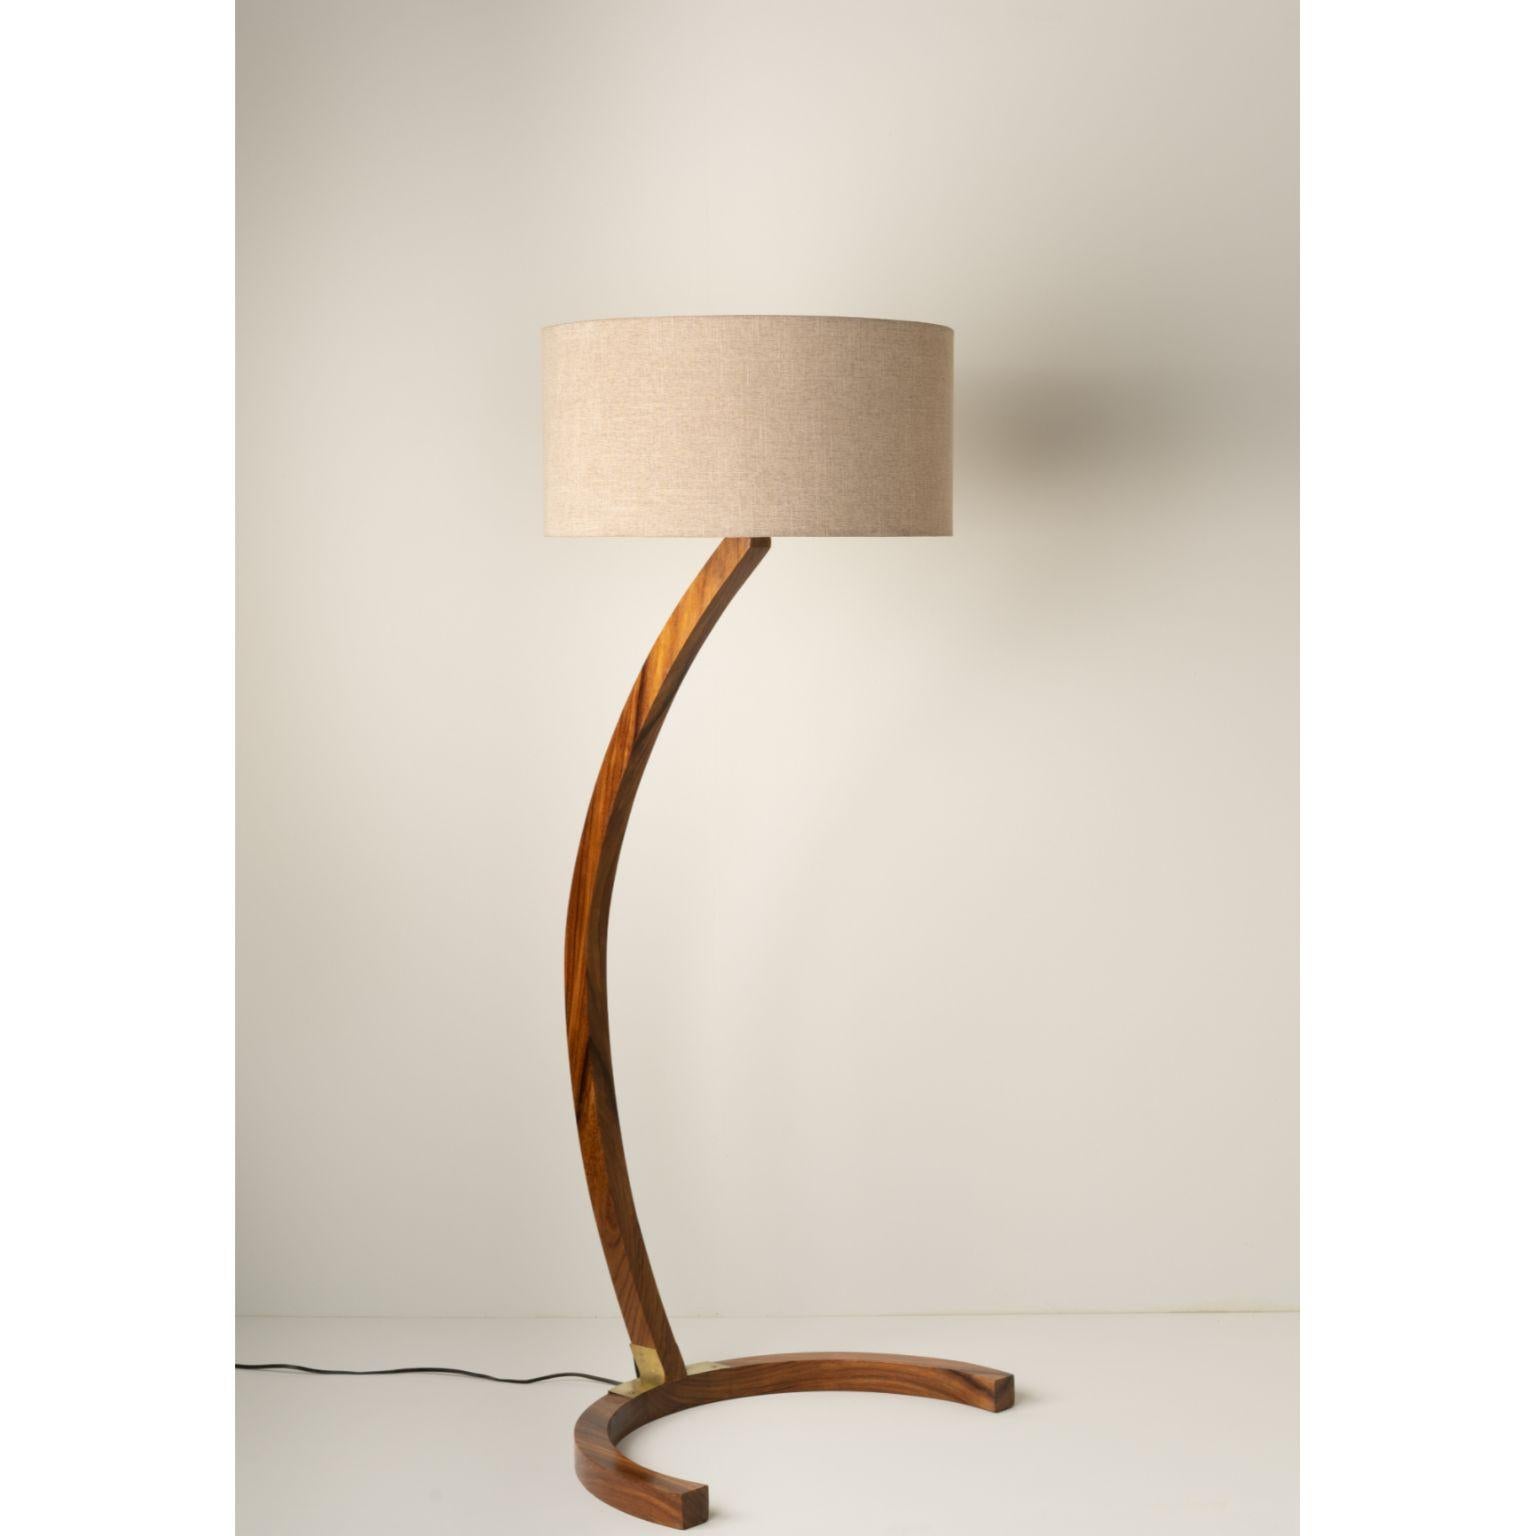 Boomerang Floor Lamp by Isabel Moncada
Dimensions: Ø 76 x H 170 cm.
Materials: Natural matte parota wood, hand-forged brushed brass, fiberglass and linen.

Formed by two arches, this stylized floor luminaire is a statement piece that bears